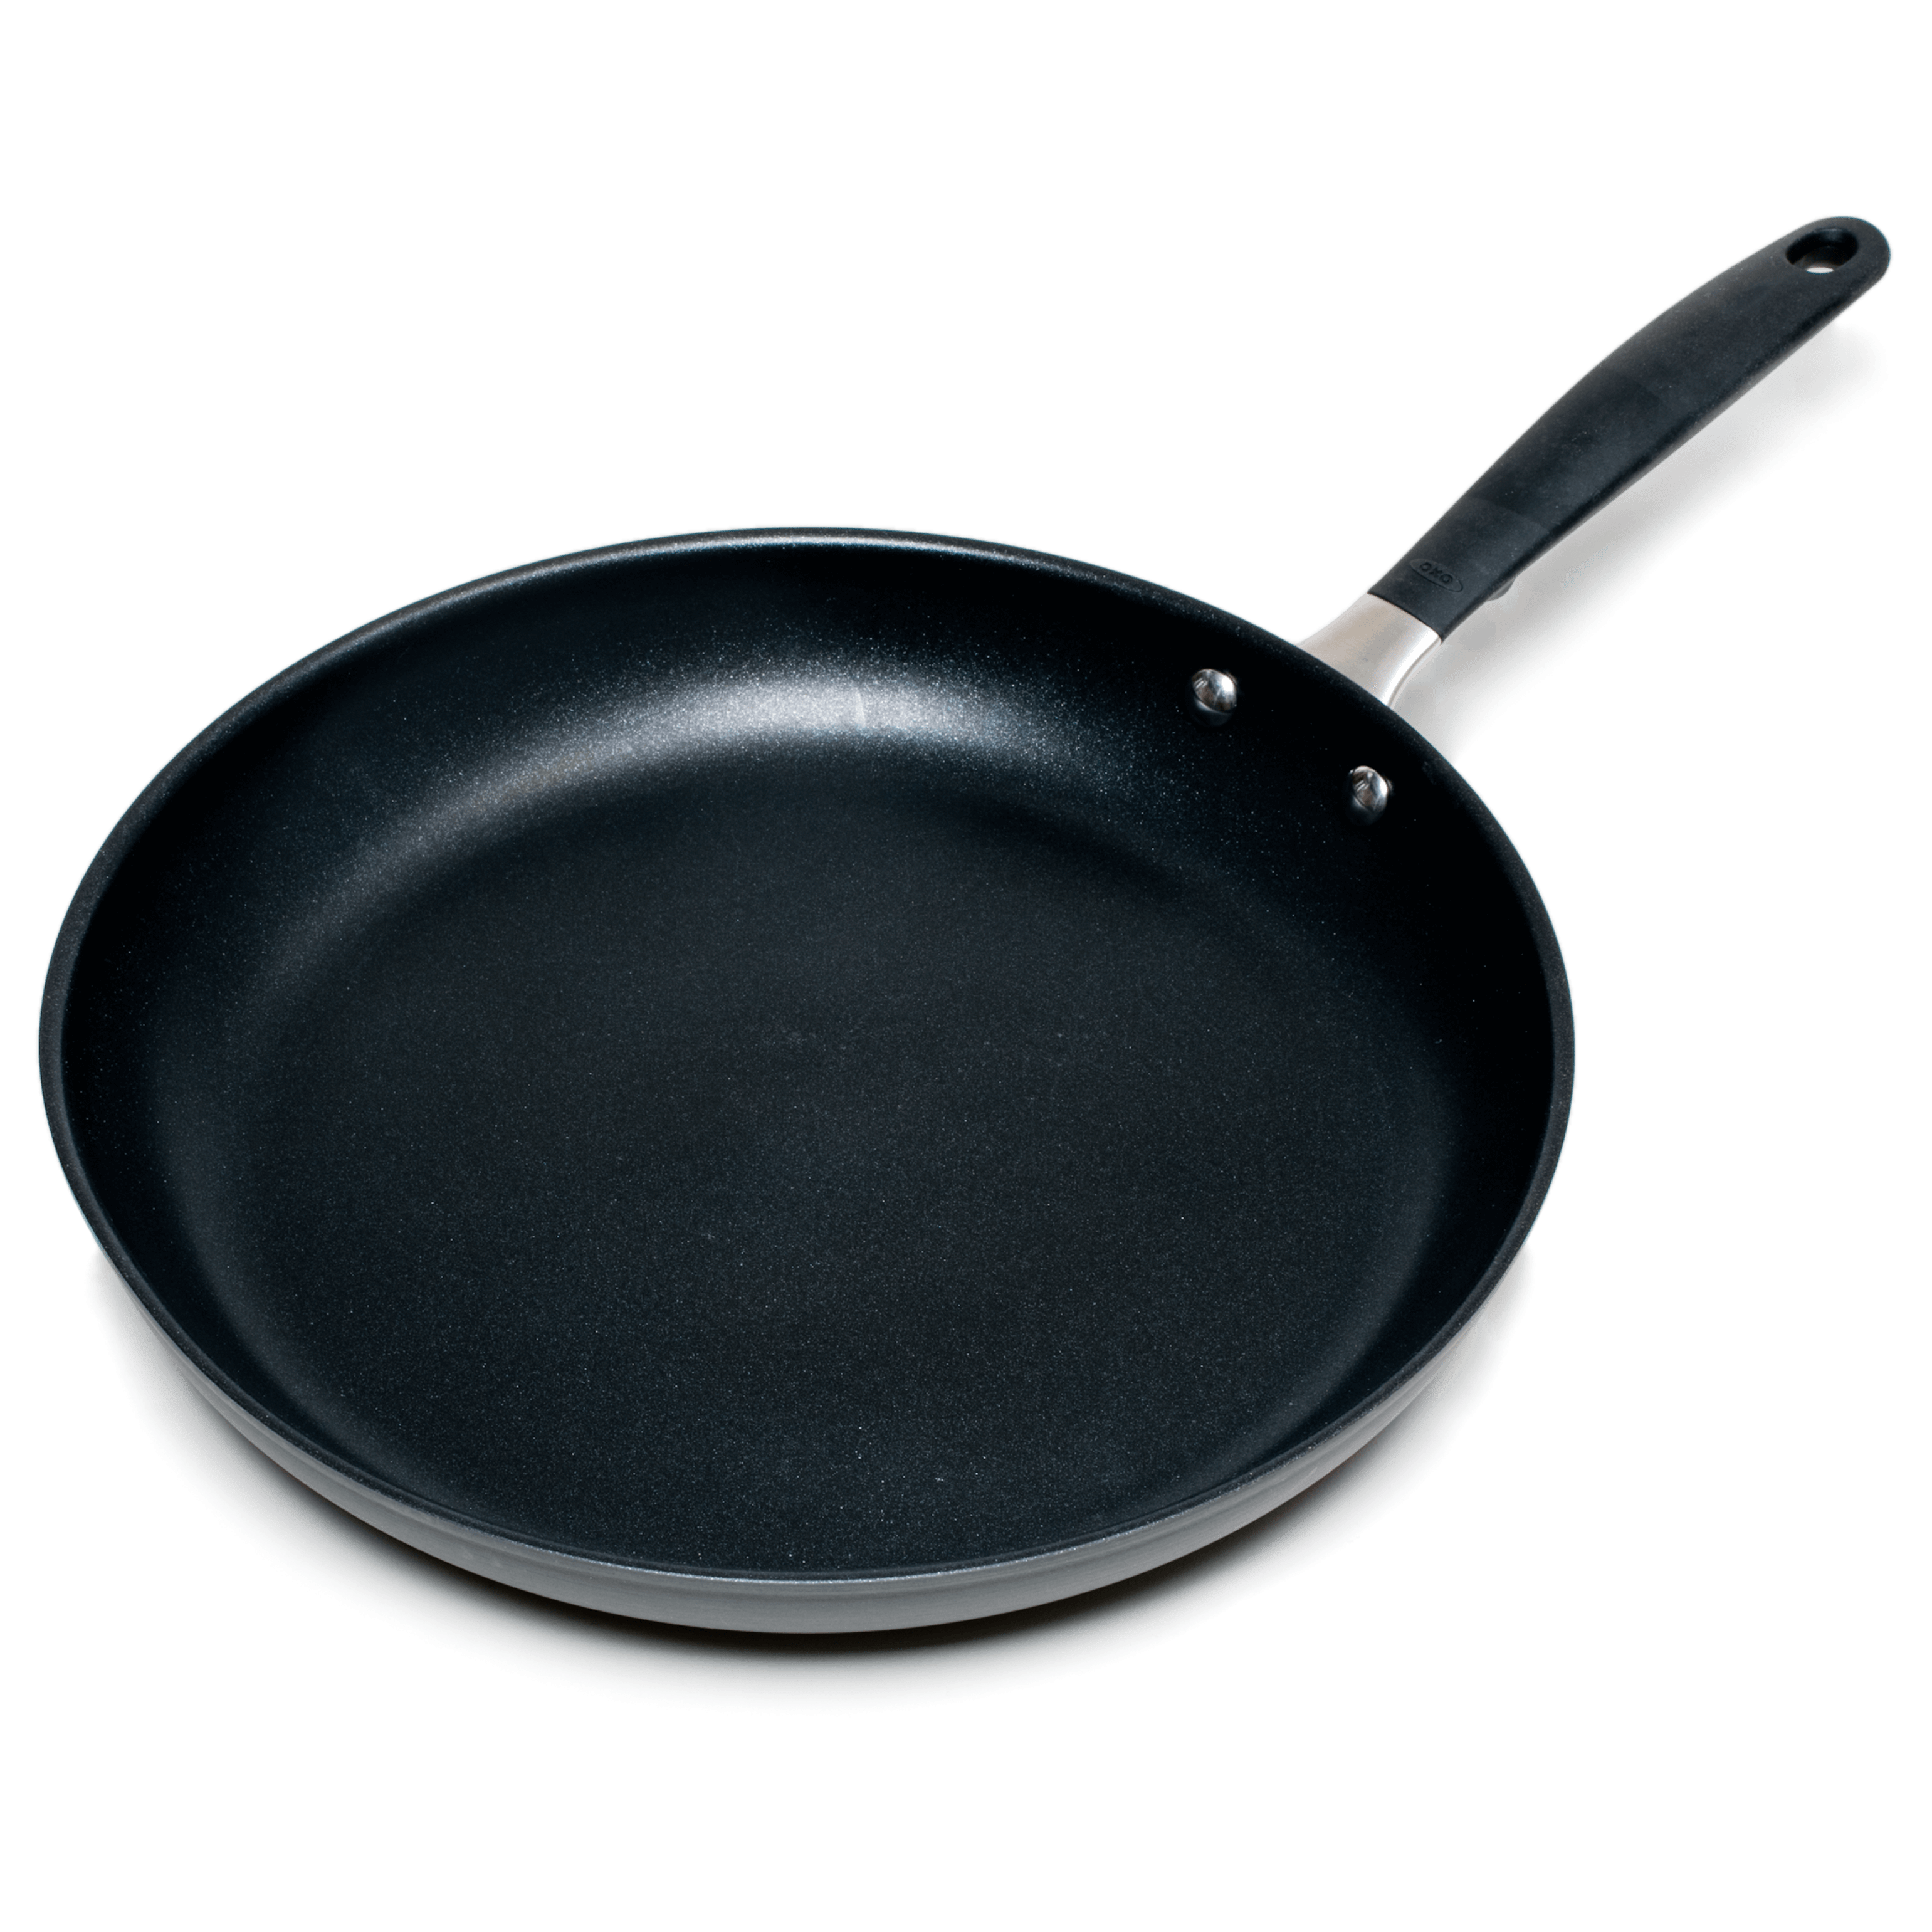  of skillets sold. Fries clipart non stick pan